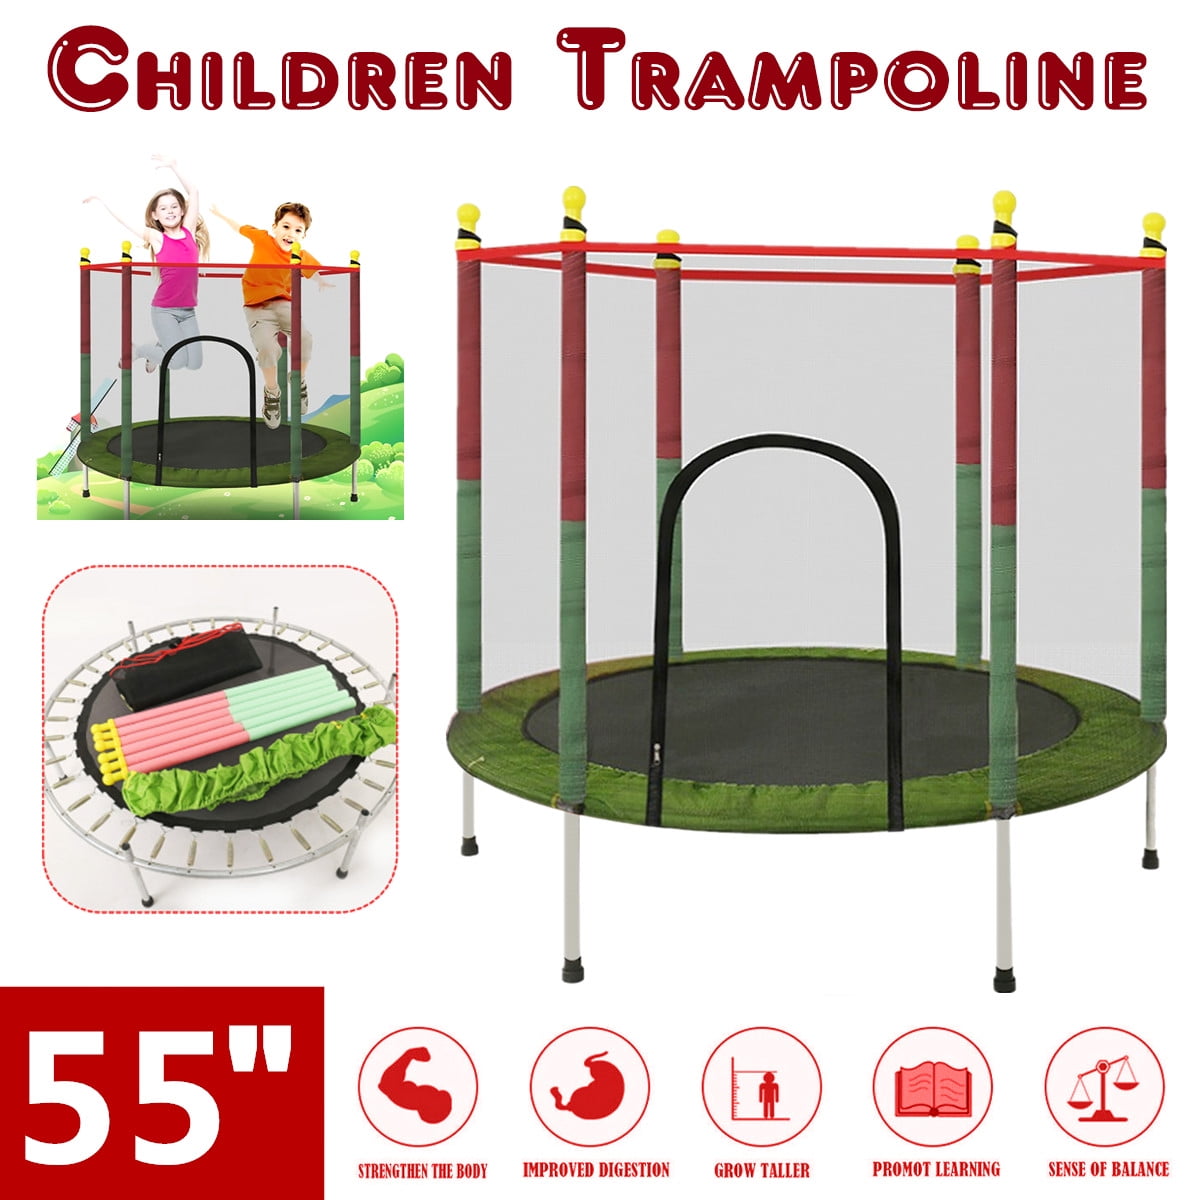 Trampoline for Kids Mini Toddler Trampoline with Safety Enclosure Net,4.5ft Recreational Trampolines for Indoor Outdoor,Gifts for Boys Girls Age 1-7